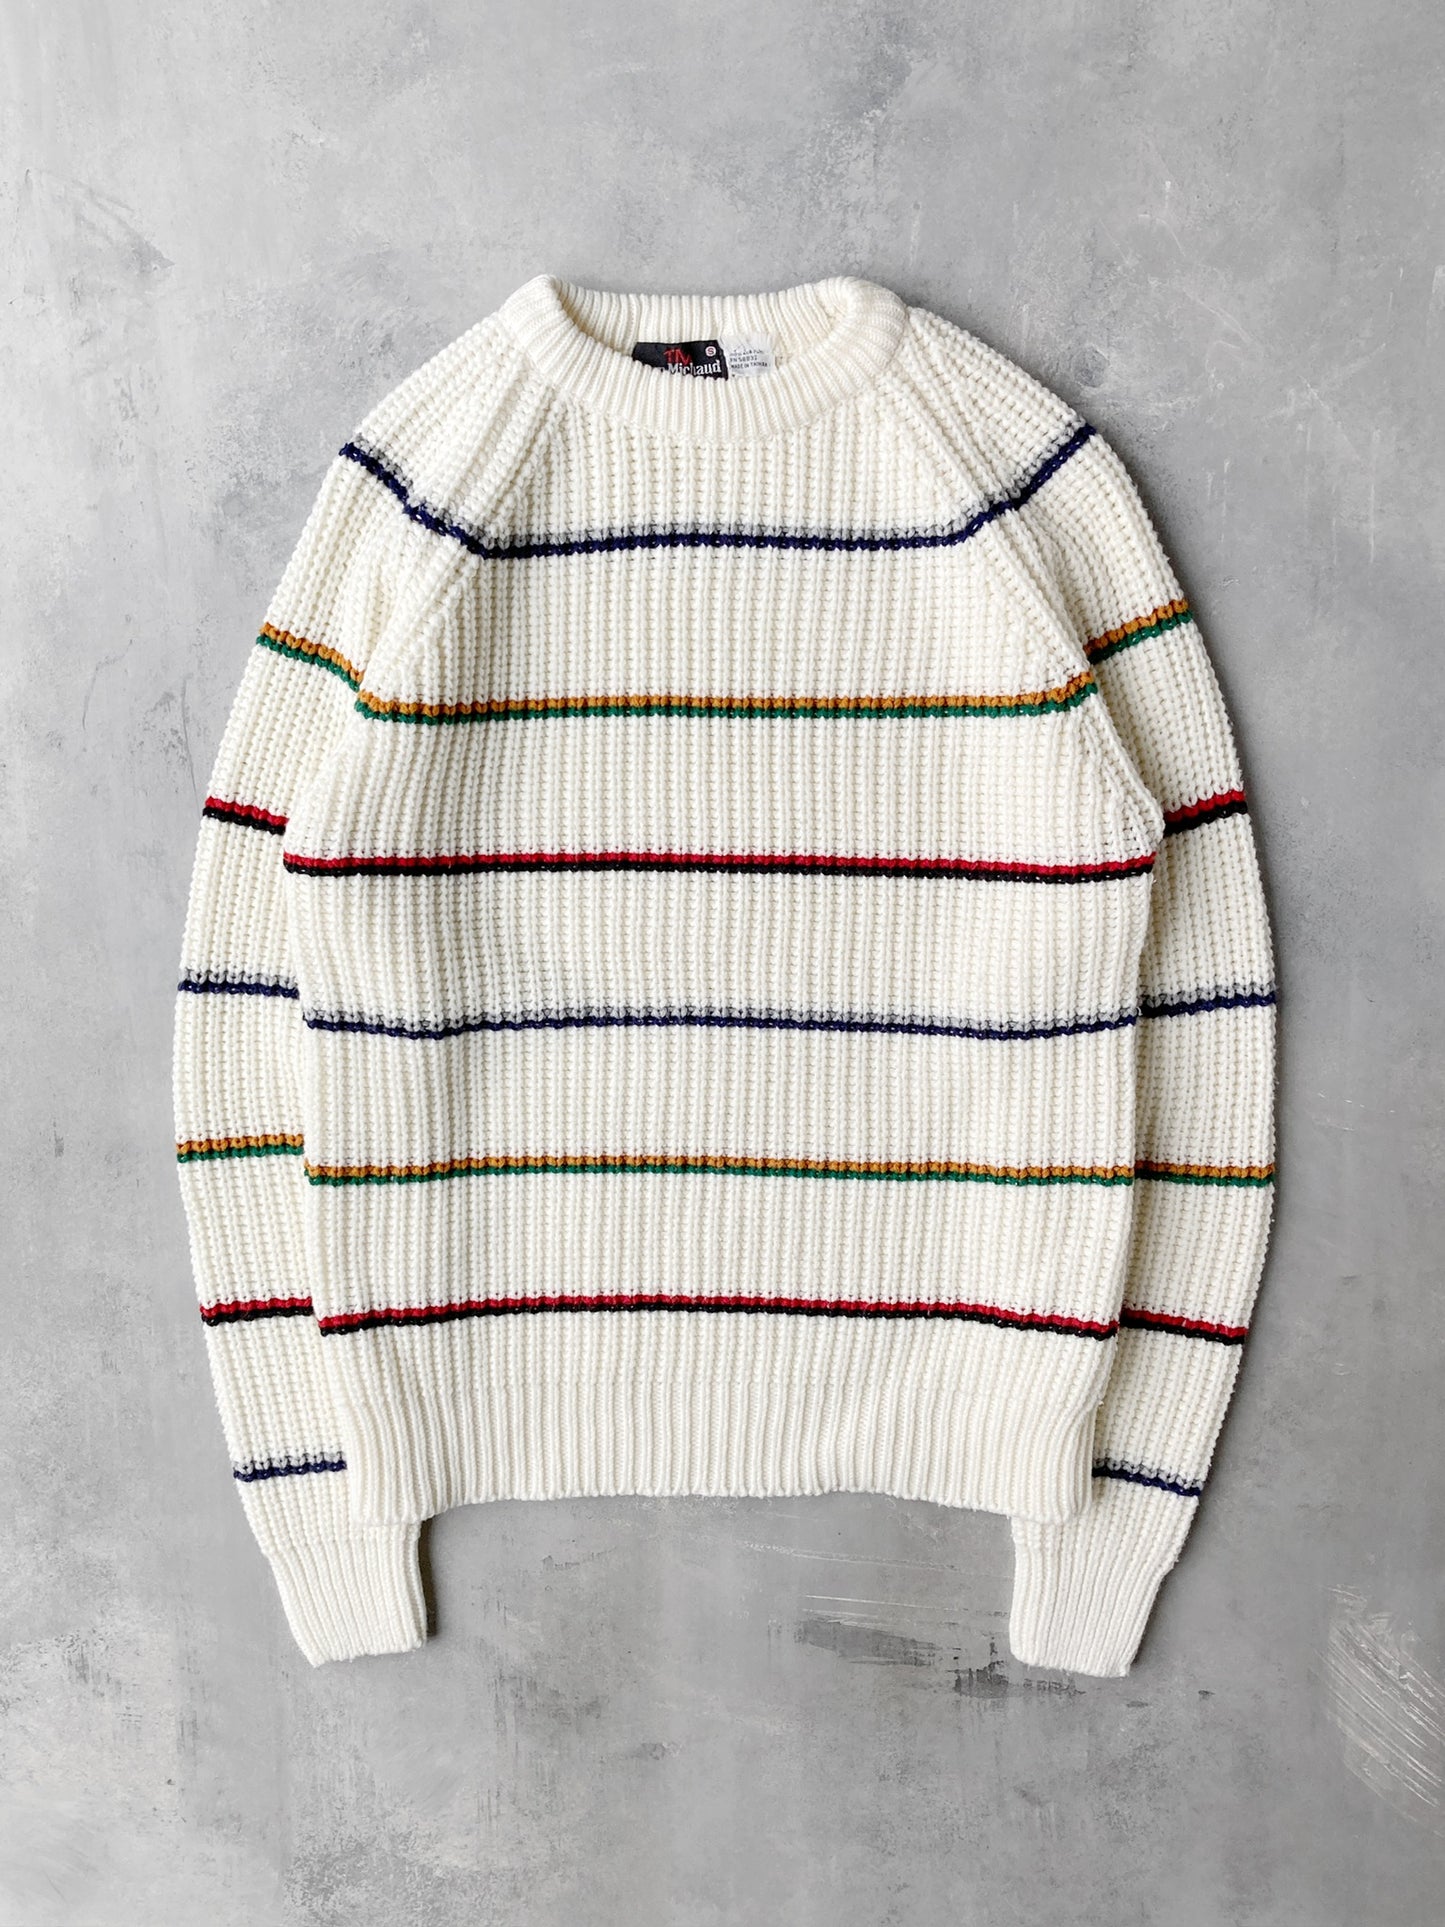 Colorful Stripe Ribbed Sweater 90's - Small